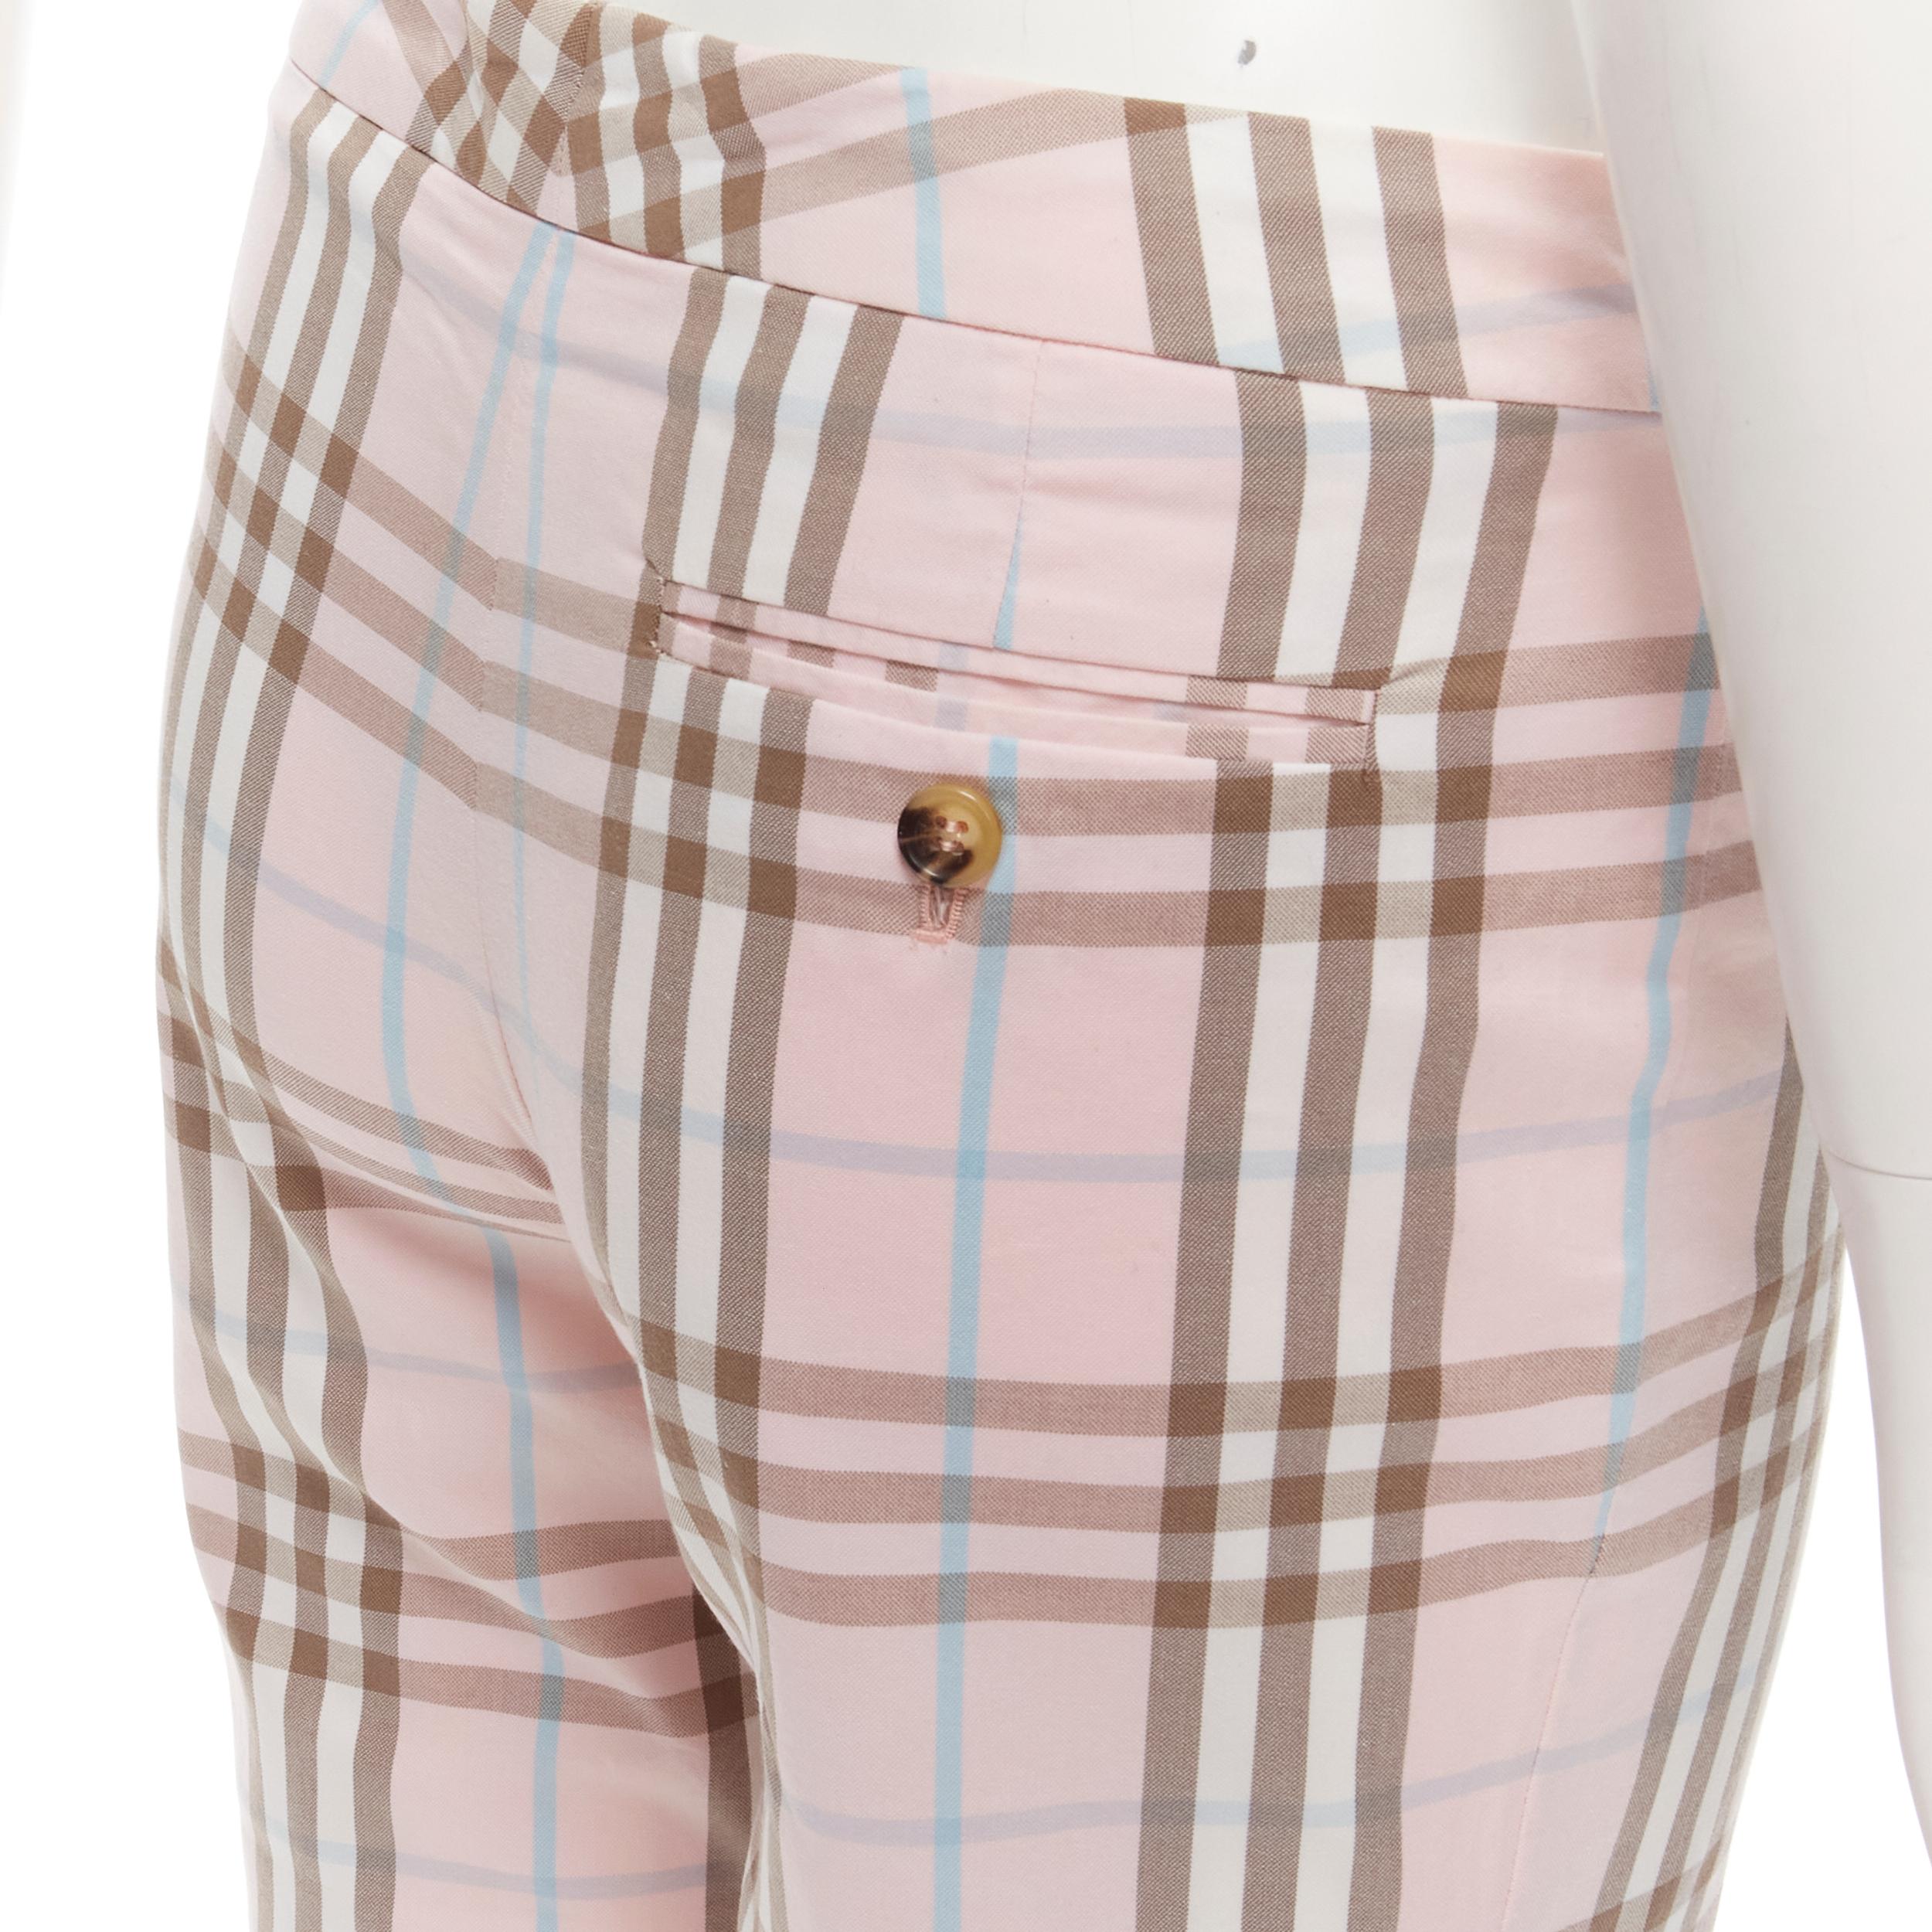 BURBERRY LONDON House Check pink cropped pants Y2K  UK6 US4
Brand: Burberry
Material: Feels like cotton
Color: Pink
Pattern: Checkered
Closure: Zip
Extra Detail: Button slit back pocket.

CONDITION:
Condition: Excellent, this item was pre-owned and